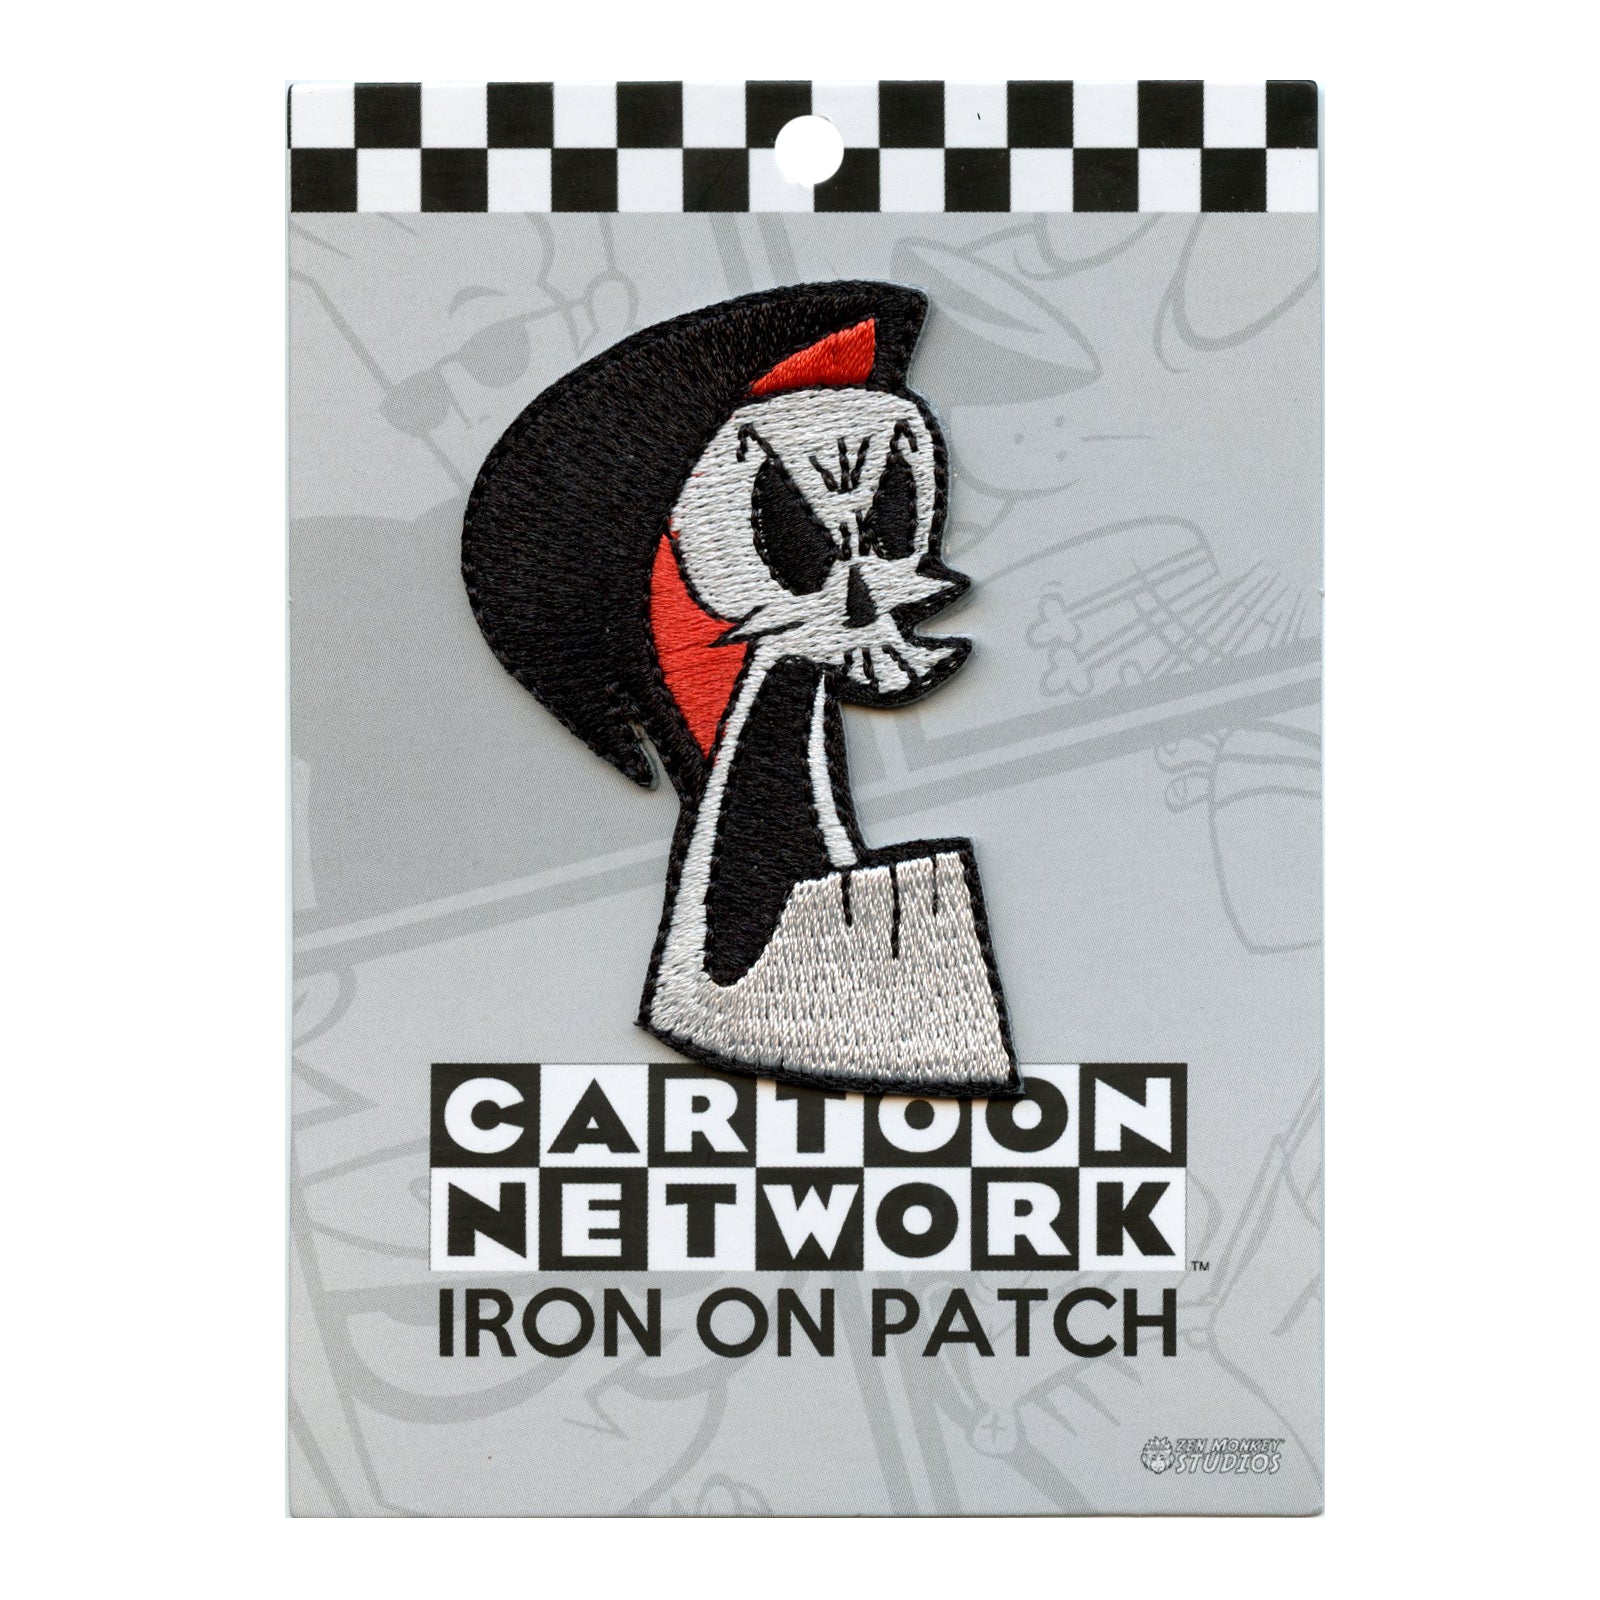 Grim Adventures Of Billy And Mandy Angry Grim Embroidered Iron On Patch 